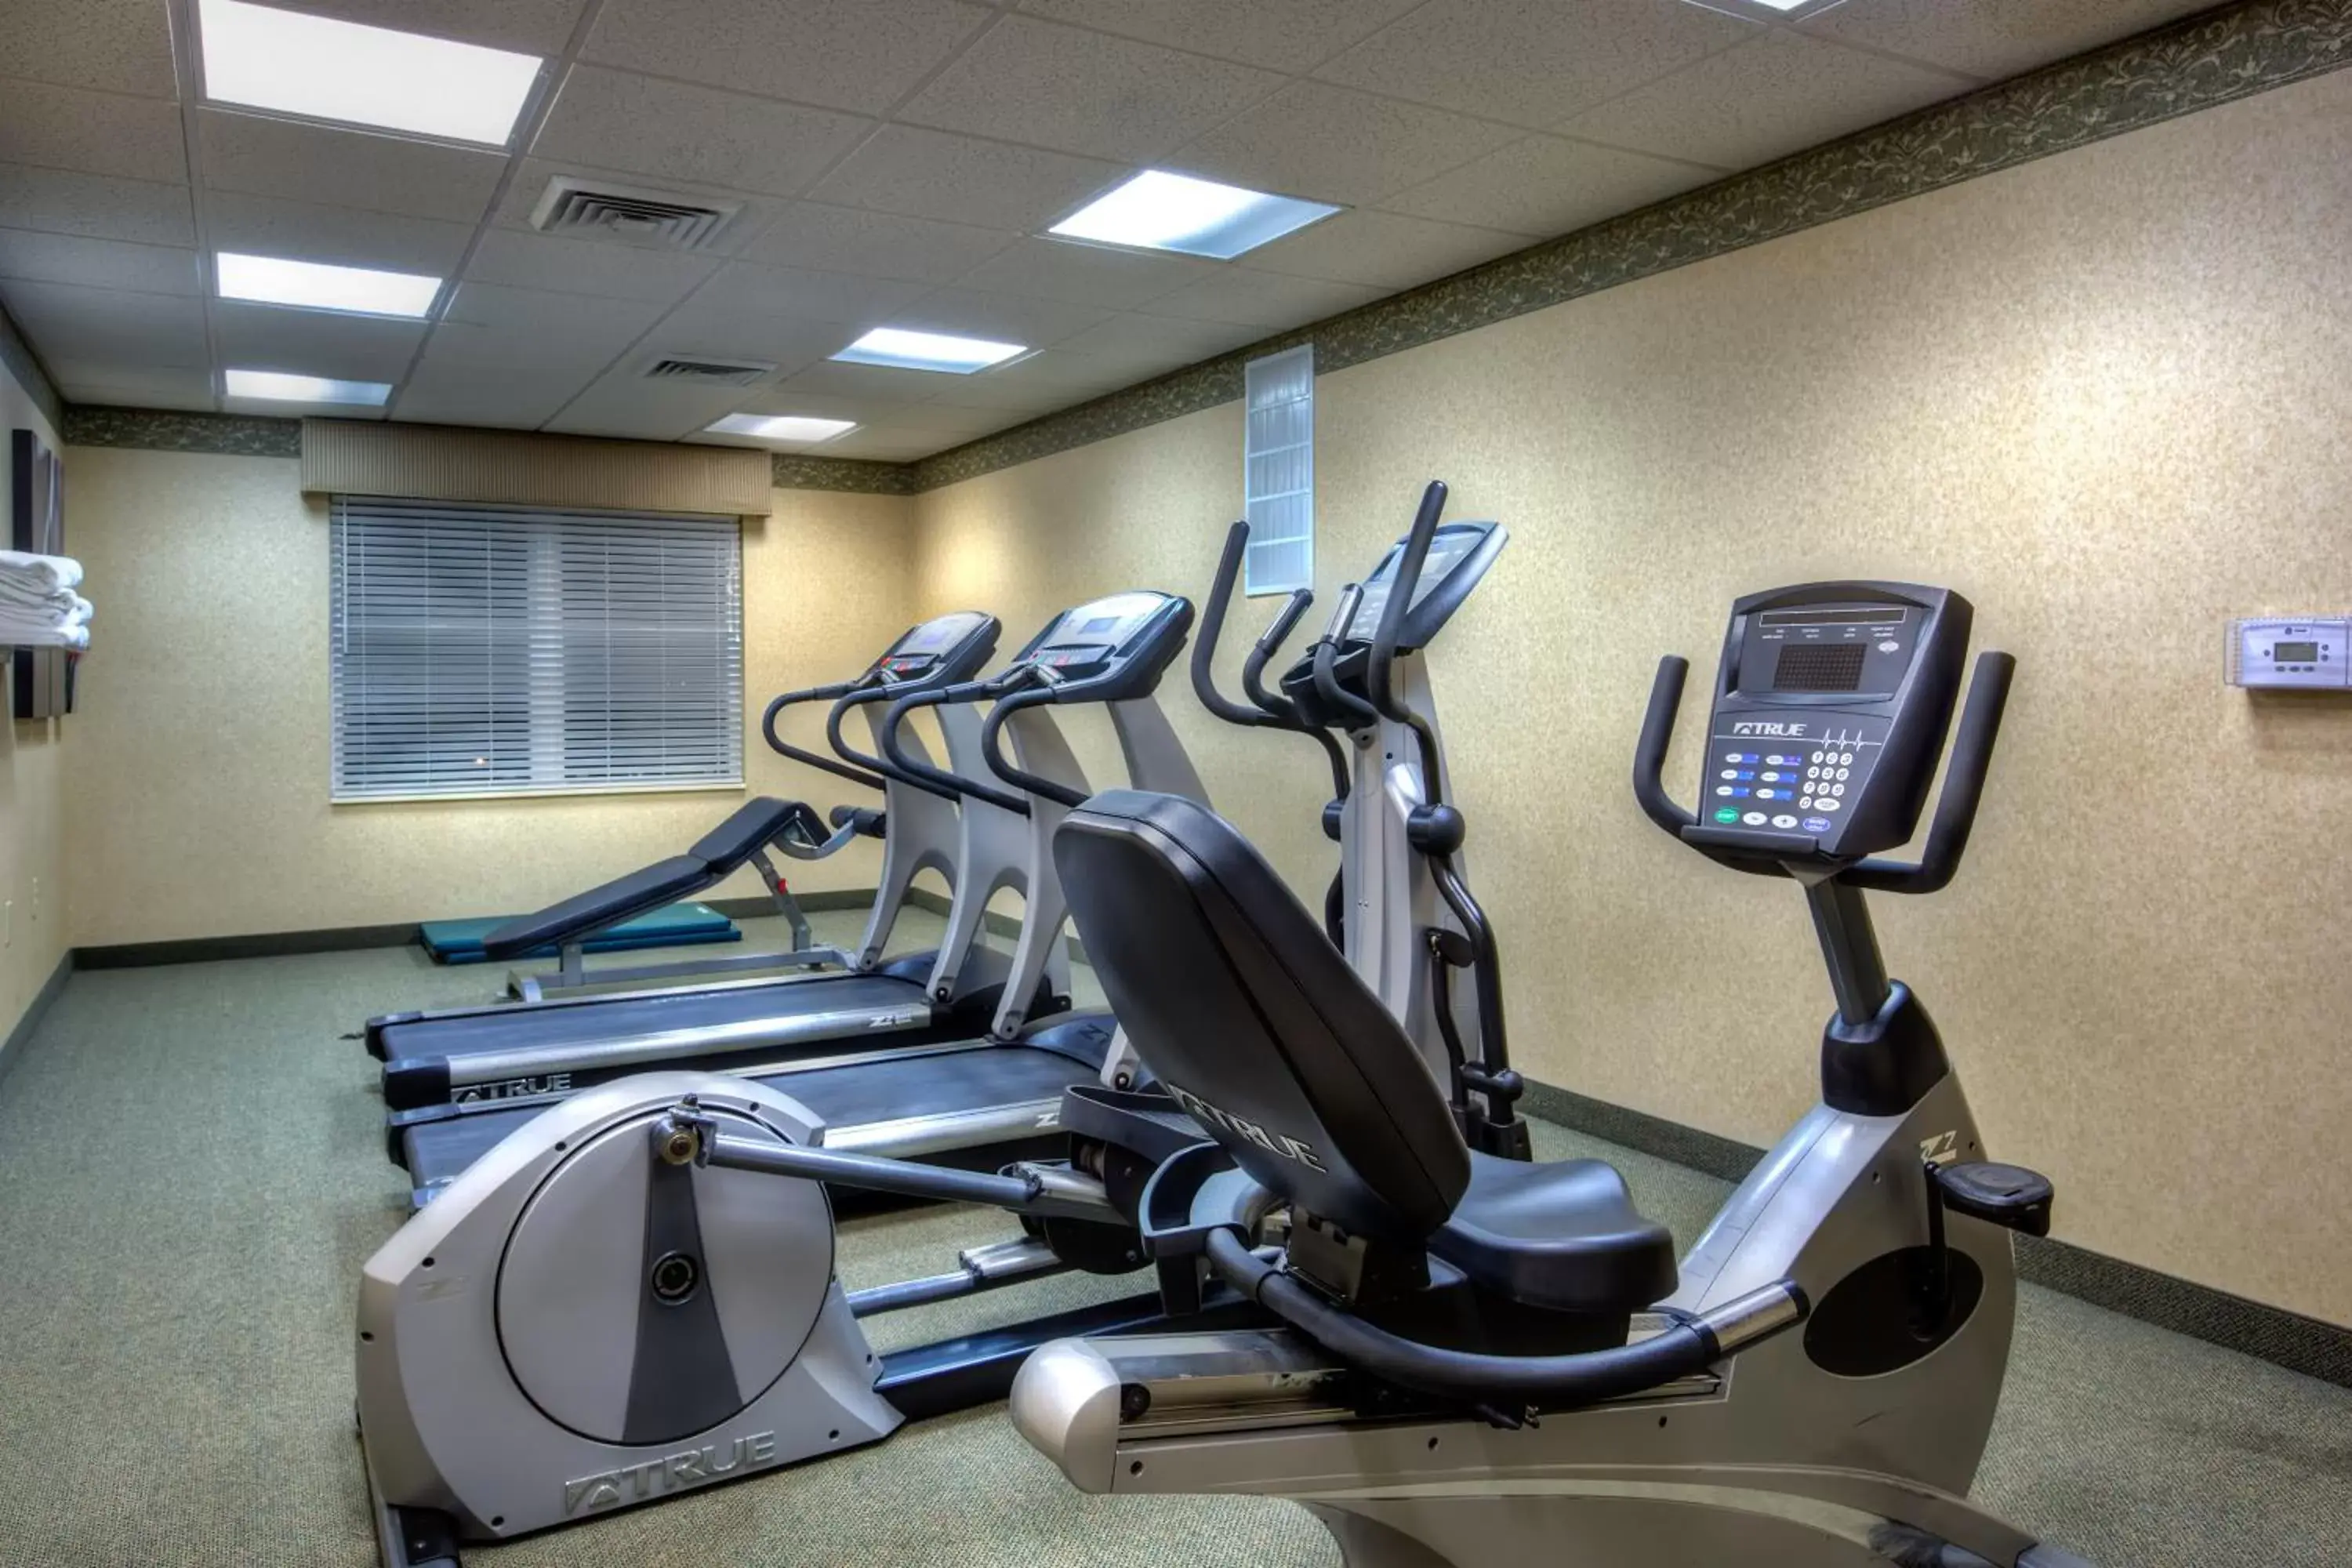 Fitness centre/facilities, Fitness Center/Facilities in Country Inn & Suites by Radisson, Boone, NC